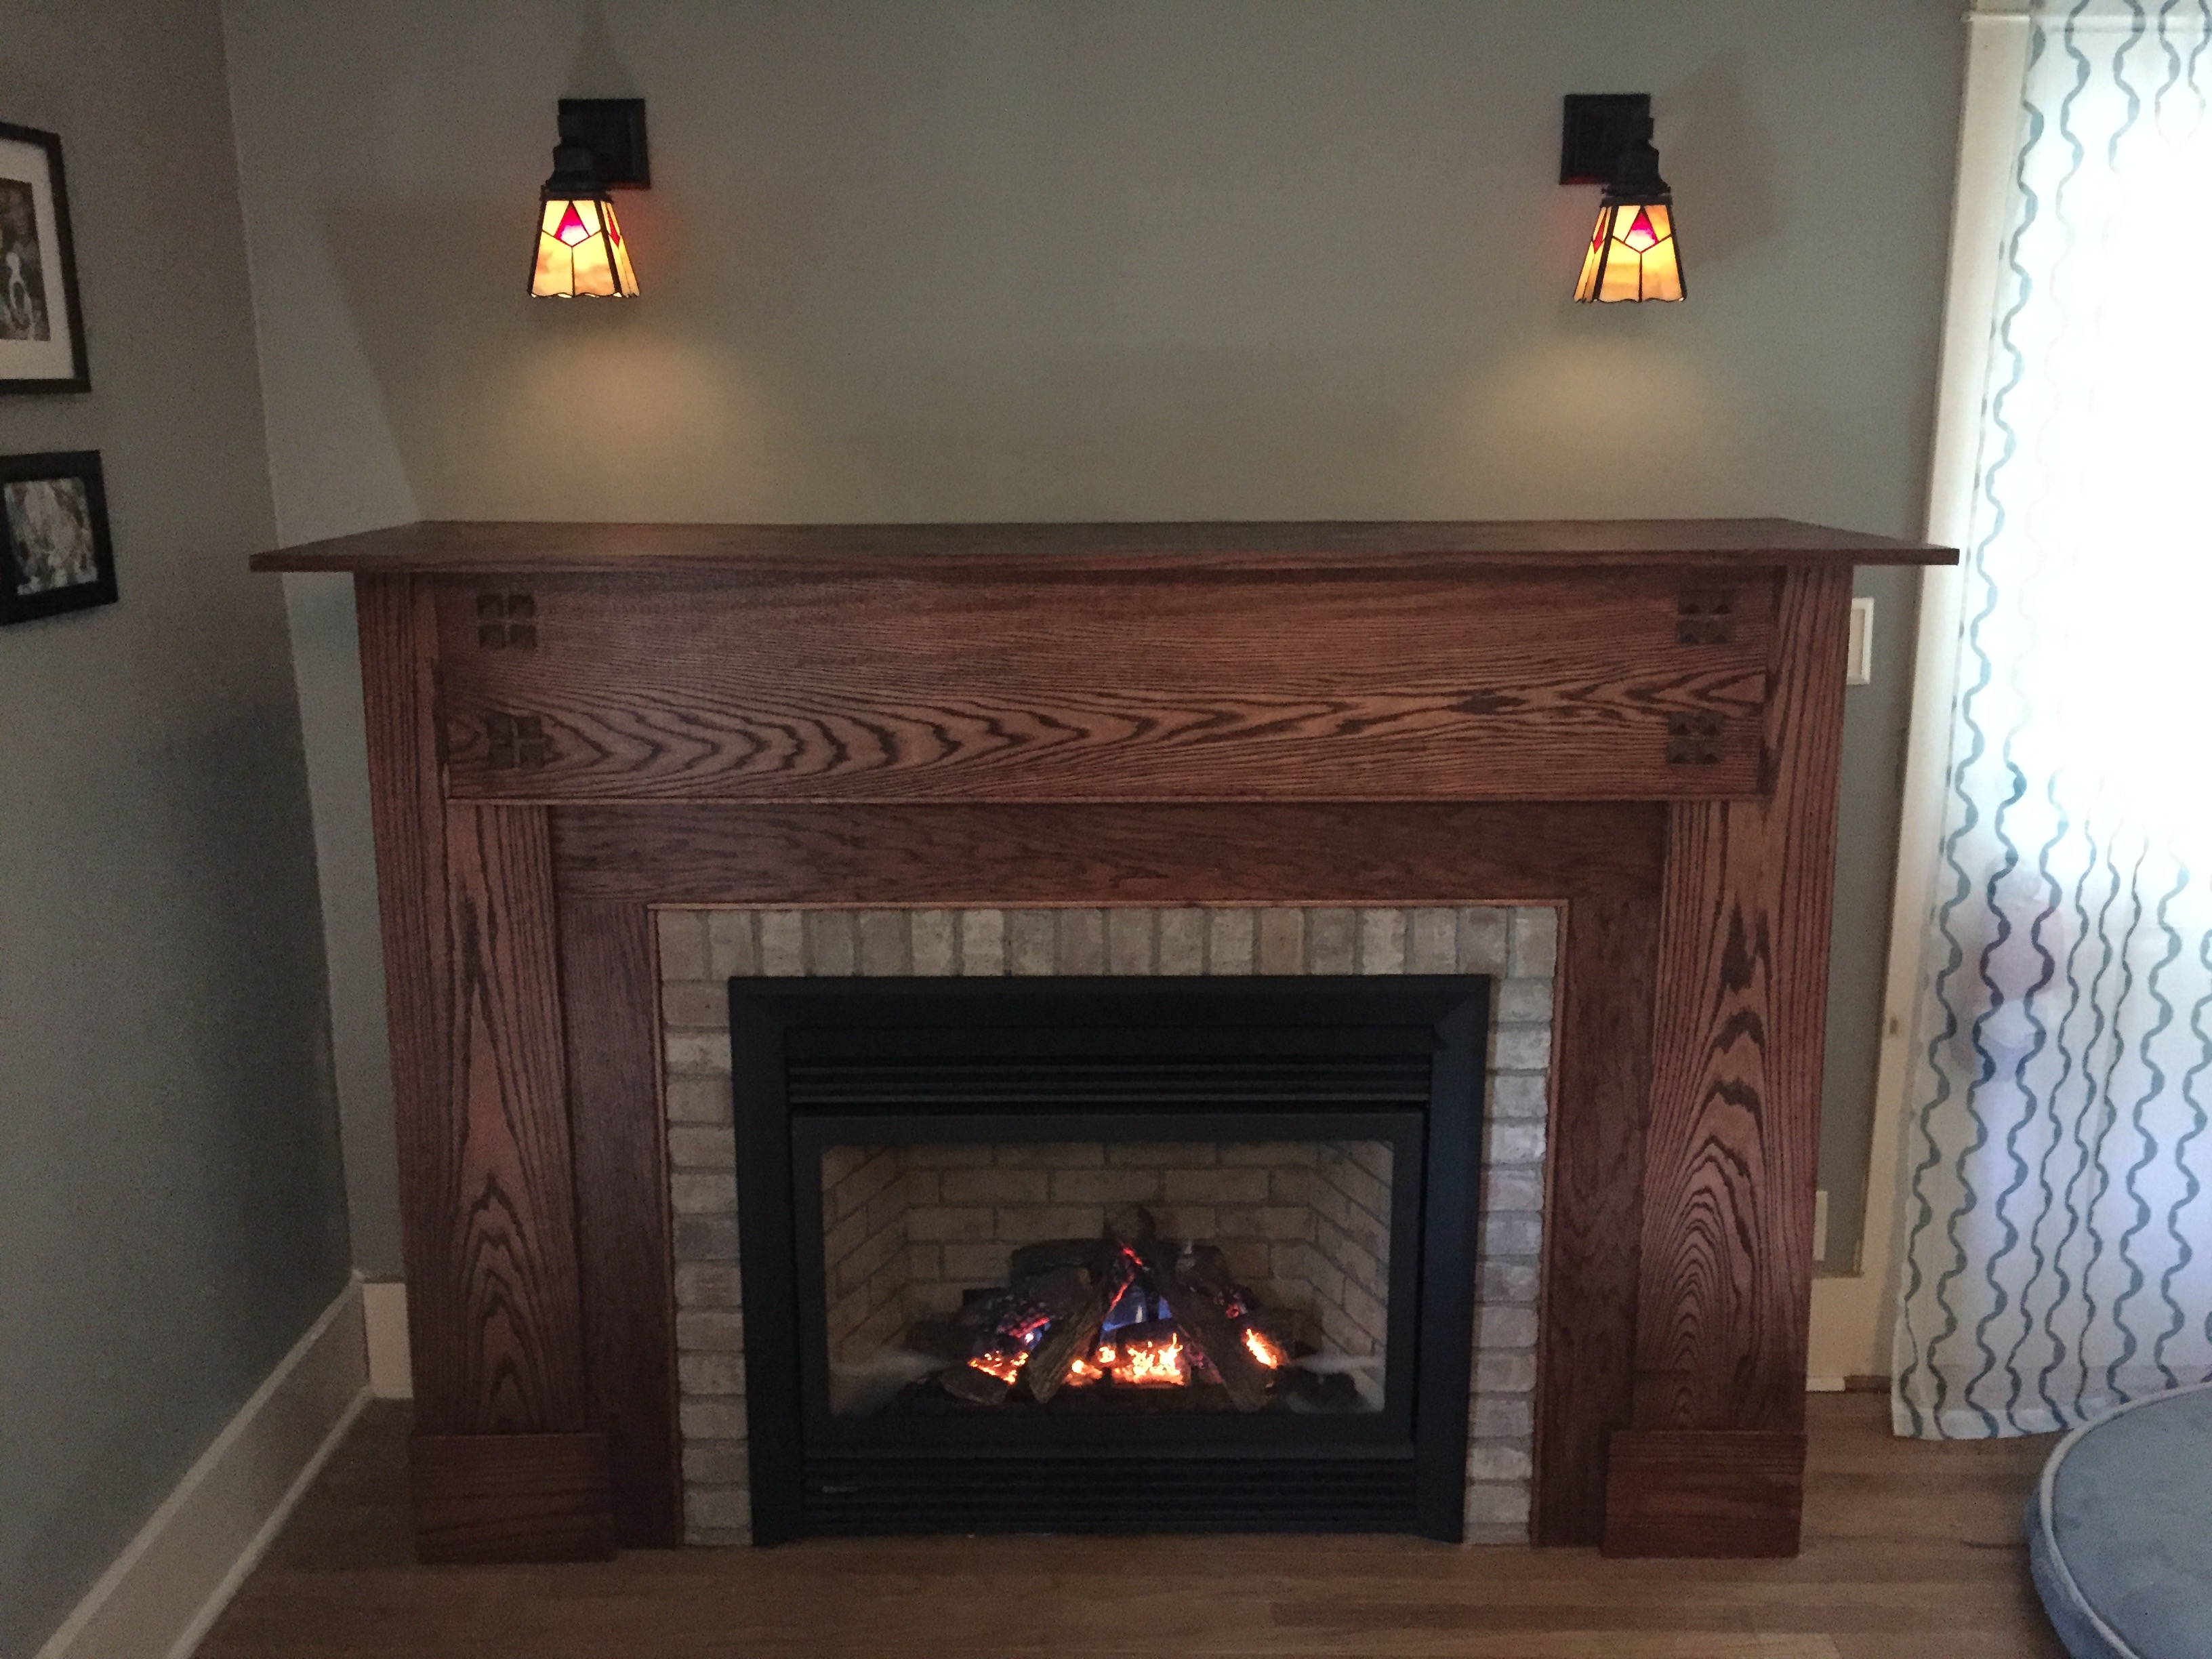 How to Build A Fireplace Mantel Shelf with Crown Molding Lovely Craftsman Style Mantel & Bookcases